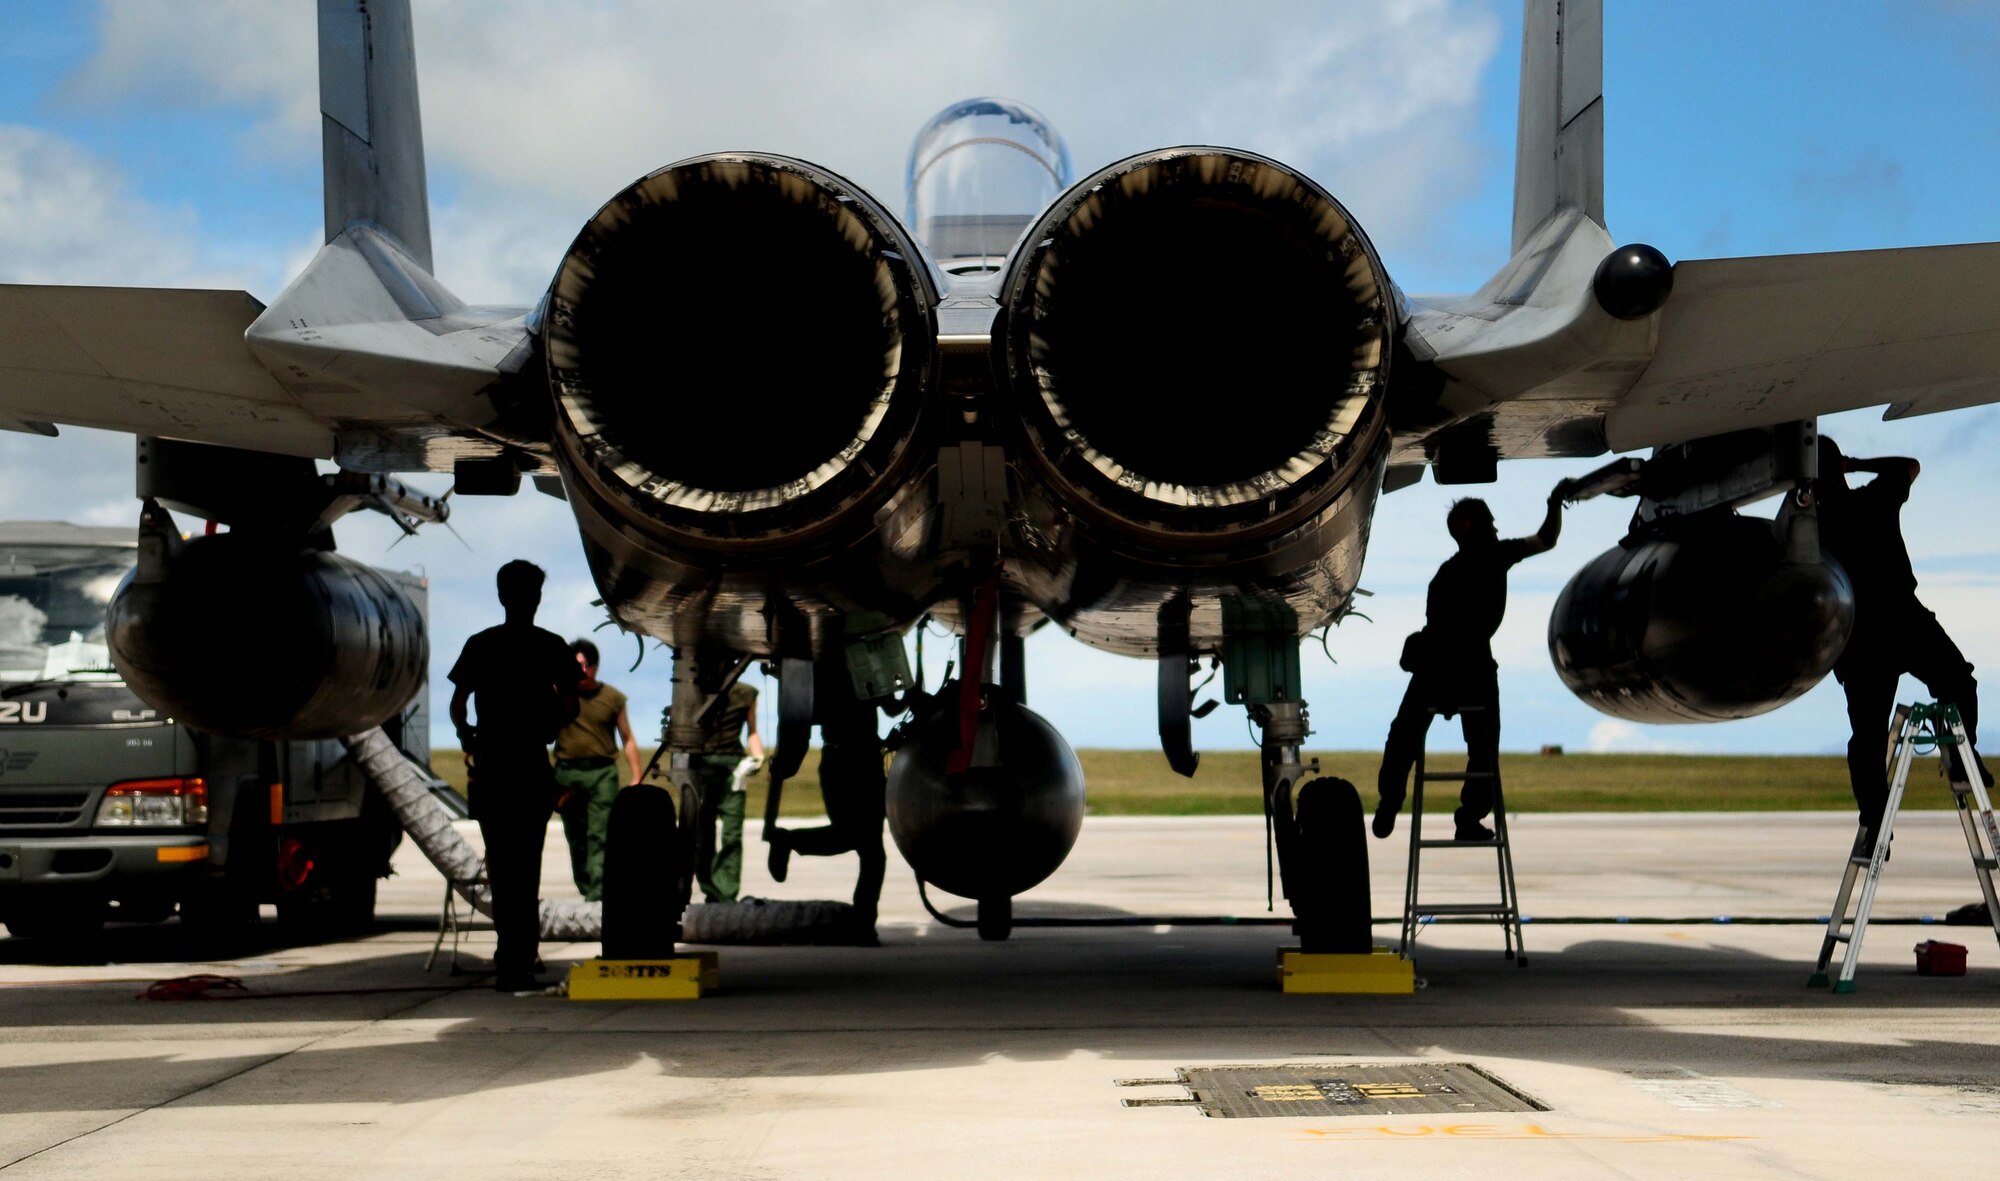 ANDERSEN AIR FORCE BASE, Guam - Japan Air Self-Defense Force maintainers perform post-flight maintenance  on  an F-15 Eagle after its arrival here Feb. 11, for the exercise Cope North 11-1. Cope North is a bilateral flying exercise between the U.S. Air Force, U.S. Navy and JASDF, improving interoperability between the two nations through two weeks of aerial scenarios. (U.S. Air Force photo/ Airman 1st Class Jeffrey Schultze)